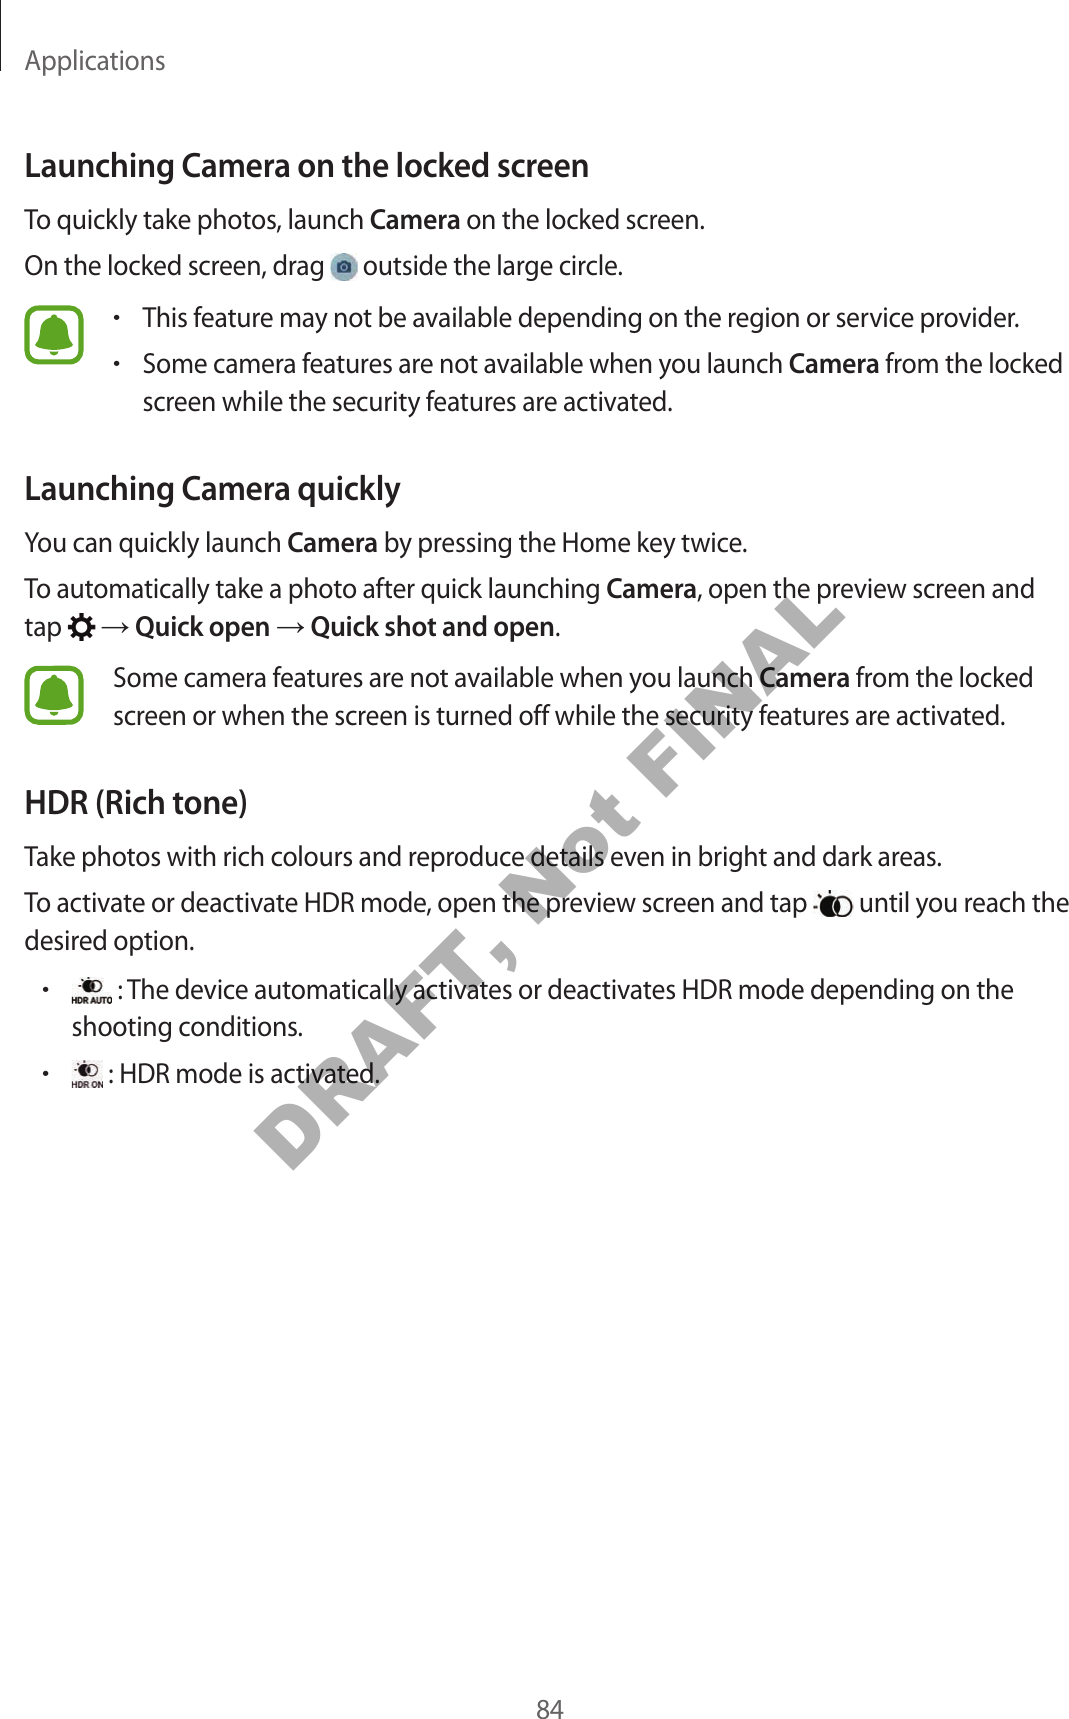 Applications84Launching Camera on the locked screenTo quickly take photos, launch Camera on the locked screen.On the locked screen, drag   outside the large circle.•This feature may not be available depending on the region or service provider.•Some camera features are not available when you launch Camera from the locked screen while the security features are activated.Launching Camera quicklyYou can quickly launch Camera by pressing the Home key twice.To automatically take a photo after quick launching Camera, open the preview screen and tap   ĺ Quick open ĺ Quick shot and open.Some camera features are not available when you launch Camera from the locked screen or when the screen is turned off while the security features are activated.HDR (Rich tone)Take photos with rich colours and reproduce details even in bright and dark areas.To activate or deactivate HDR mode, open the preview screen and tap   until you reach the desired option.• : The device automatically activates or deactivates HDR mode depending on the shooting conditions.• : HDR mode is activated.DRAFT, Not FINAL